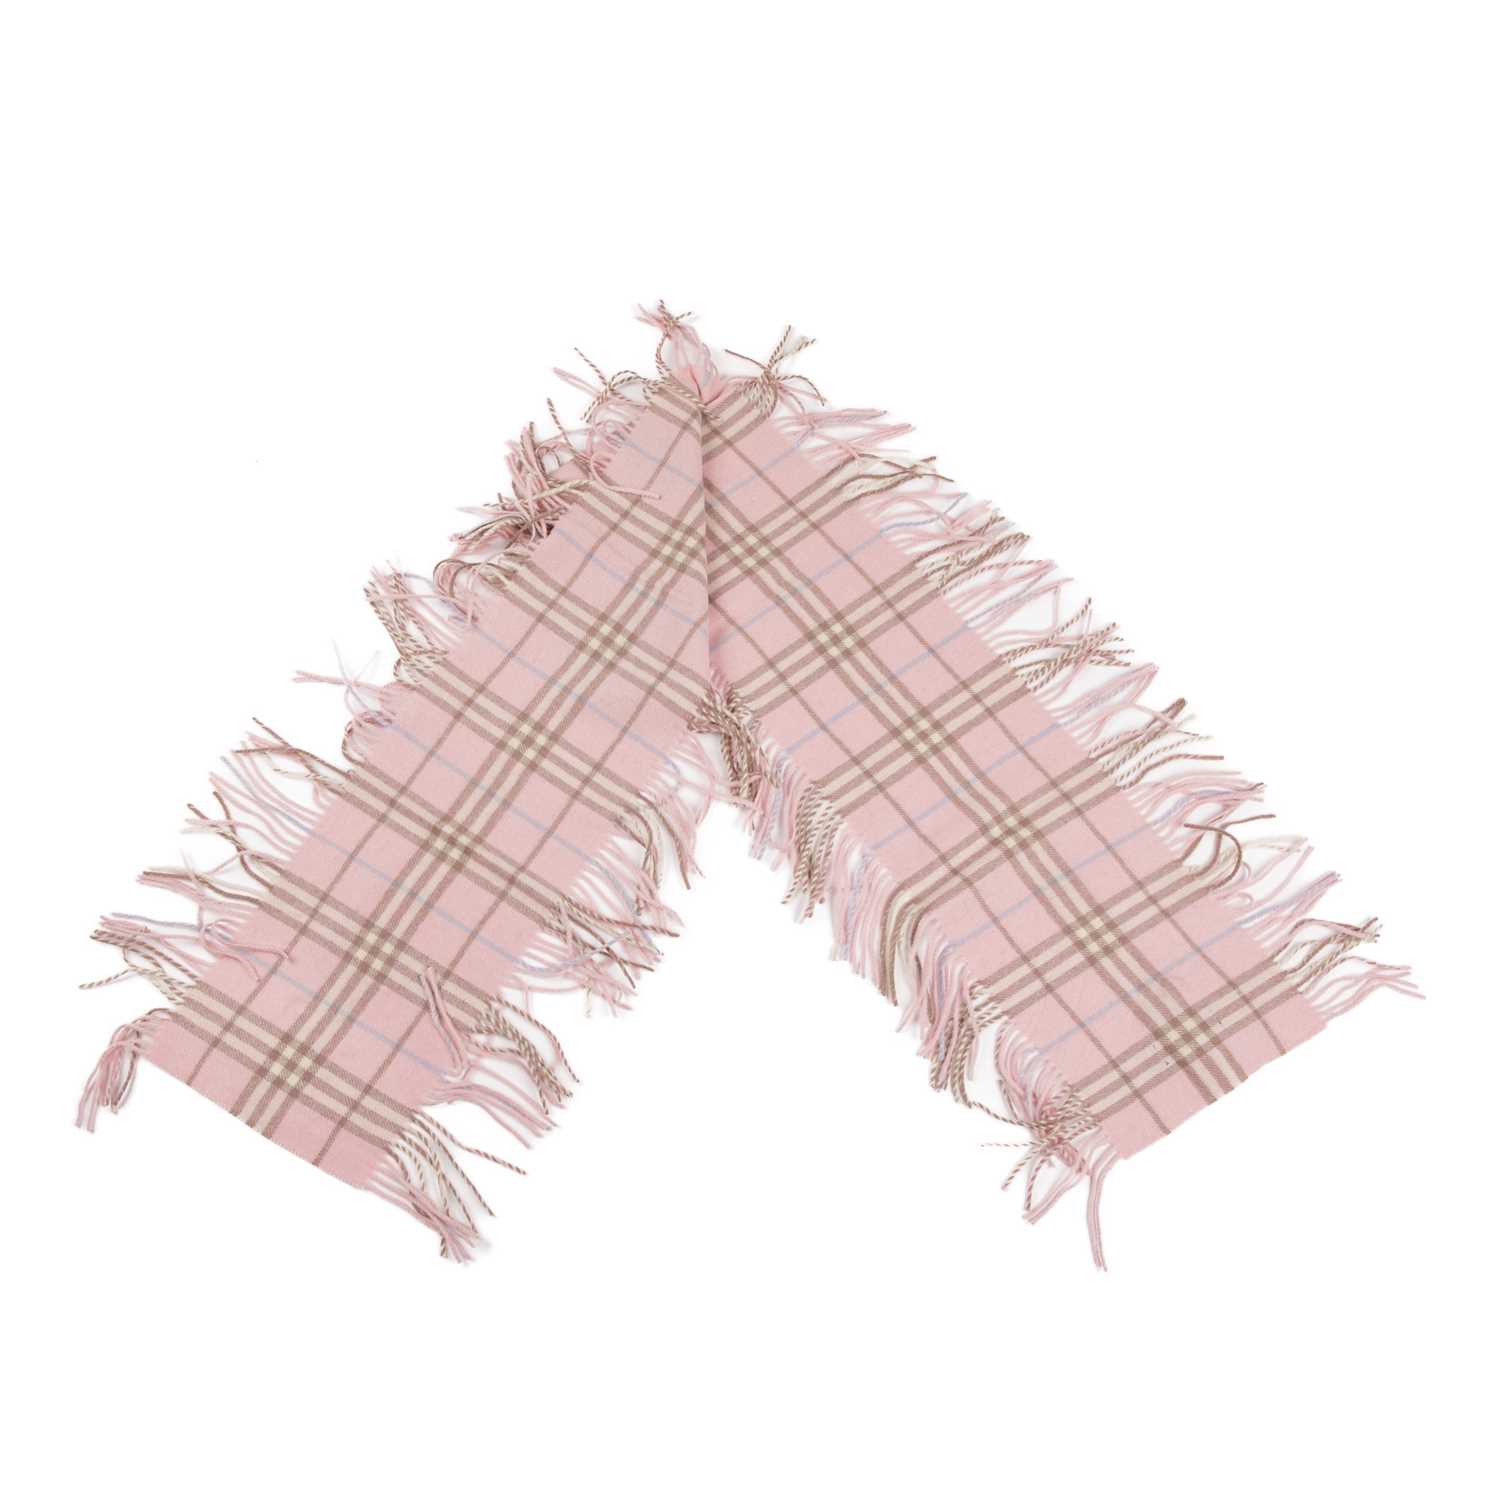 Burberry, two Nova Check lambswool scarves, to include a pale yellow scarf with fringe detailing - Image 3 of 4